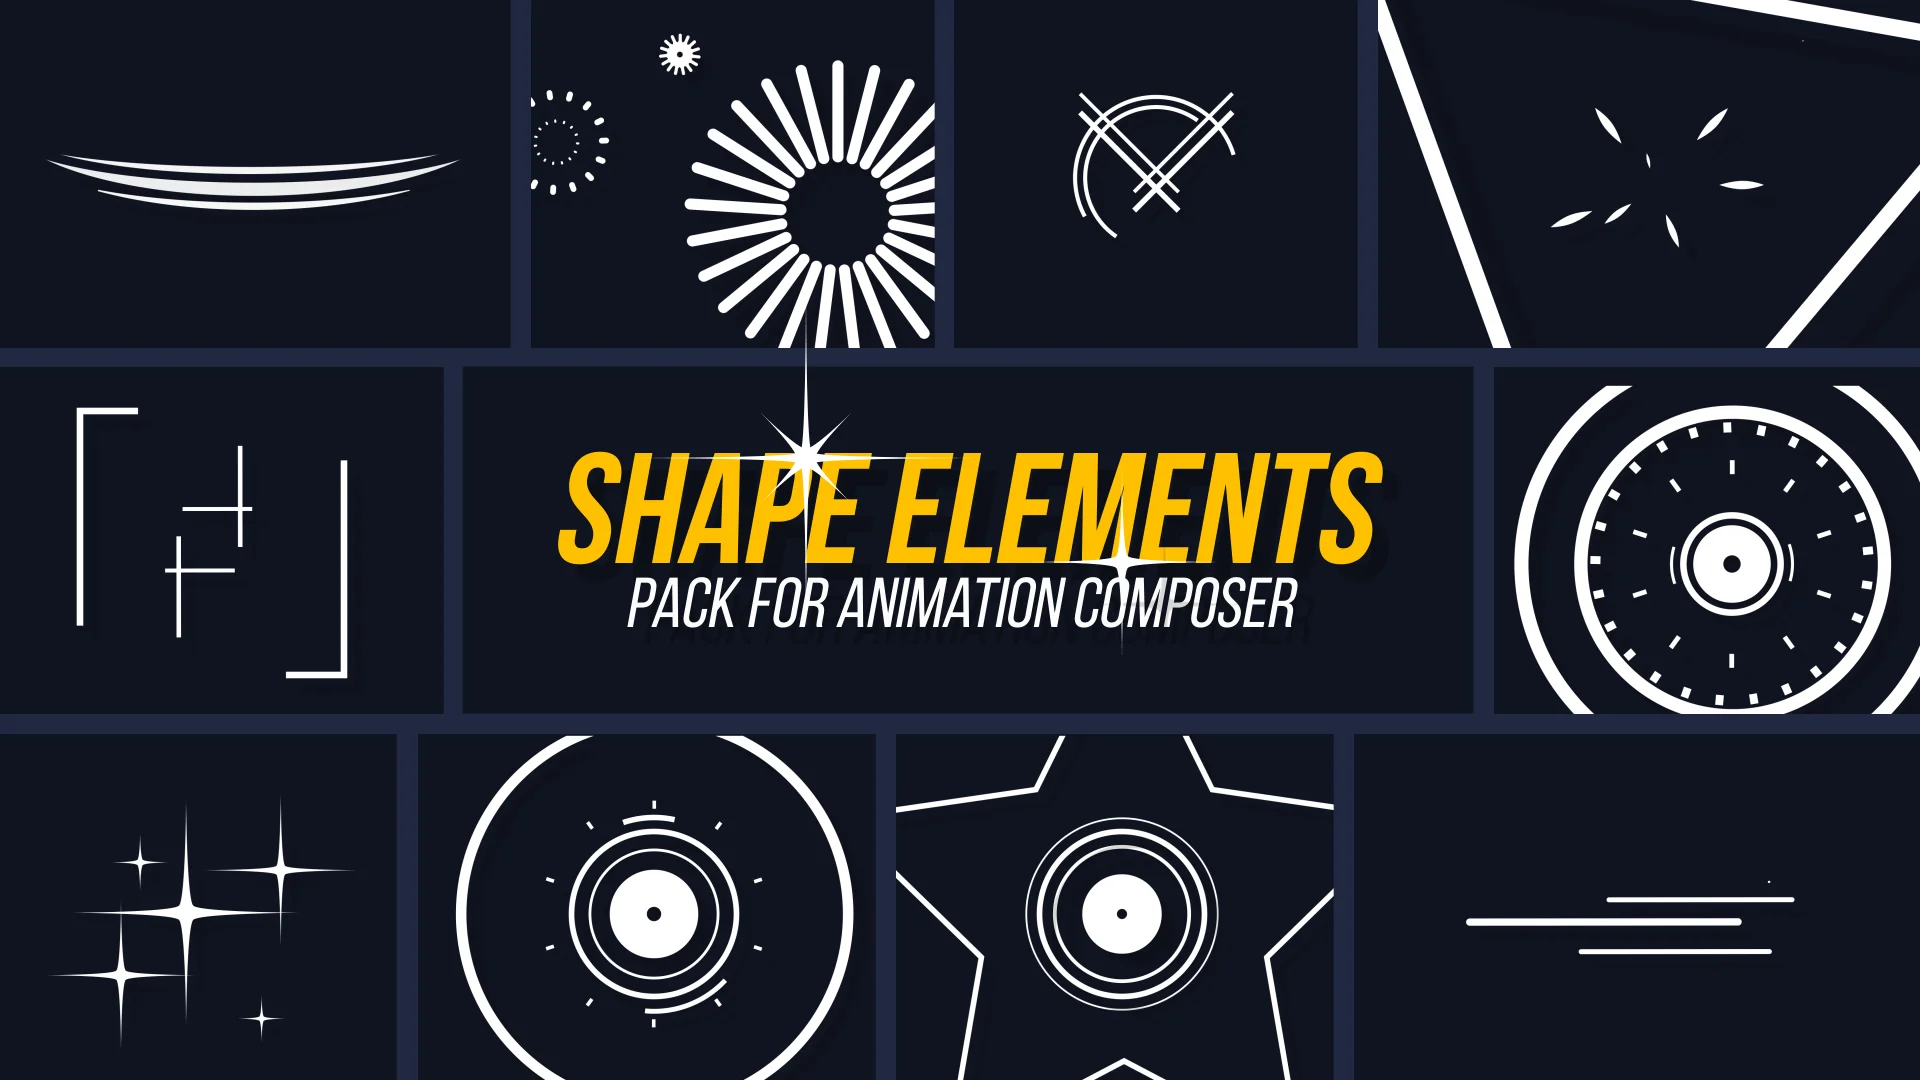 Shape elements. Element animation. Animation Composer. Videohive Shape and Motion animated elements Pack.